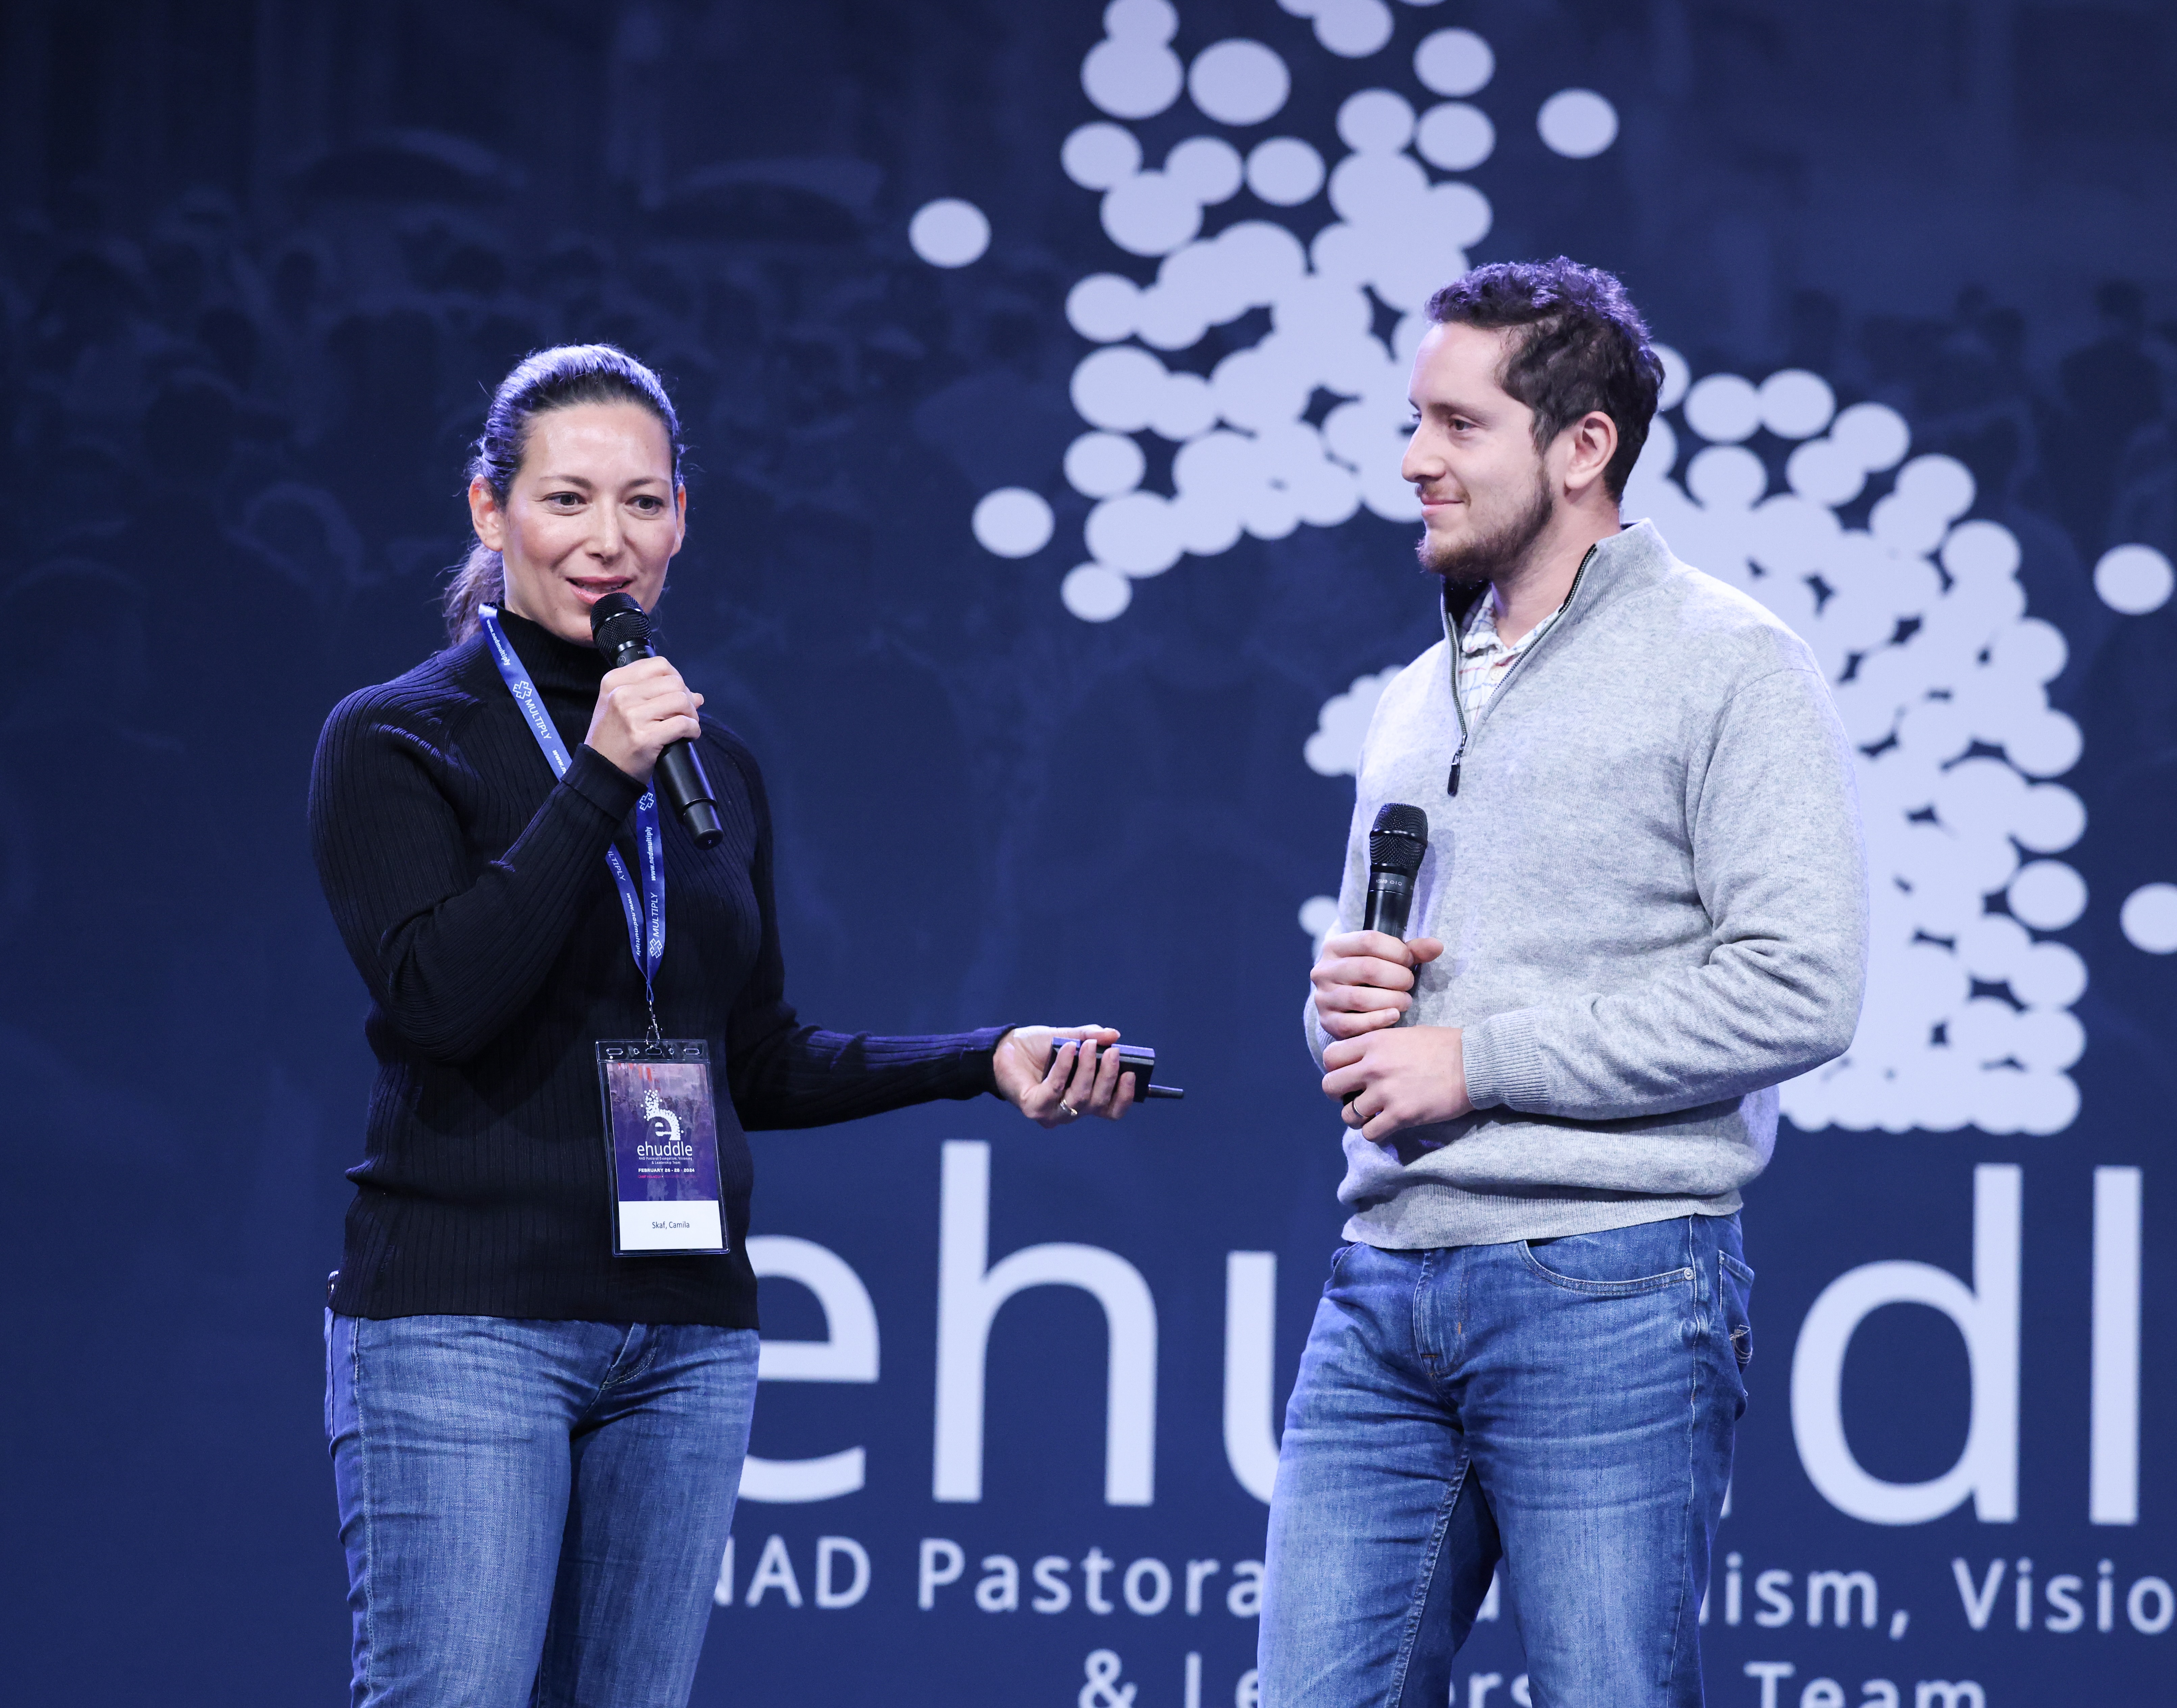 A white woman and white man presenting on stage at a conference. The woman is holding the mic.